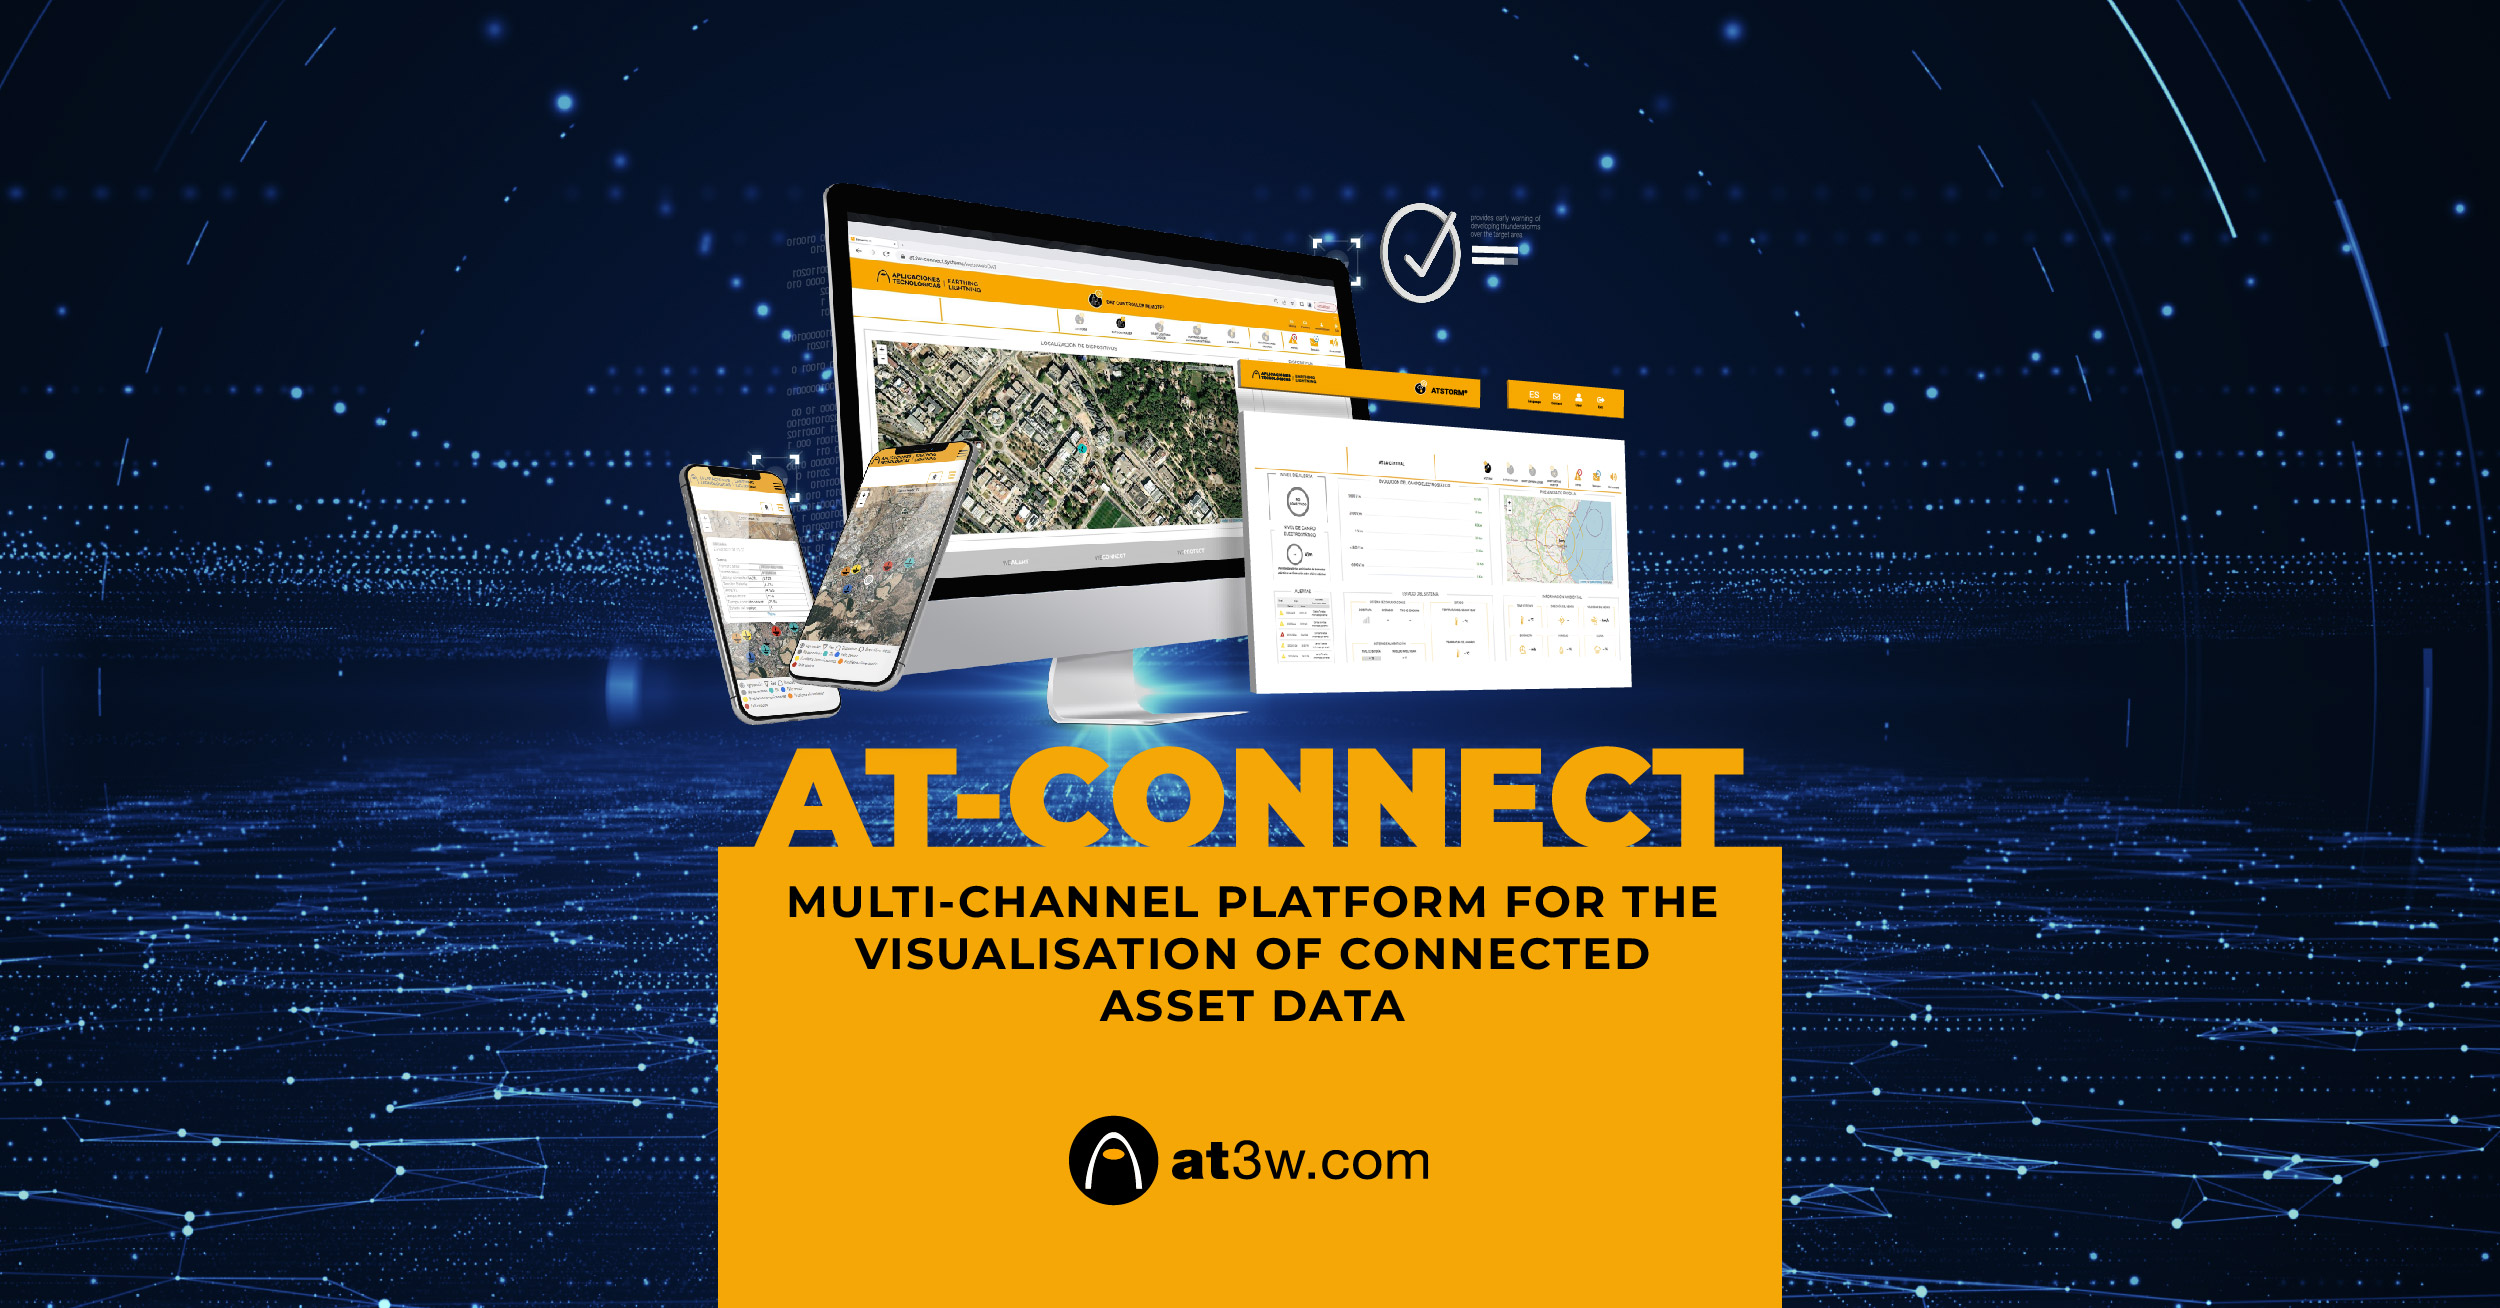 data-visualisation-platform-for-intelligent-earthing-and-lightning-protection-products-and-services